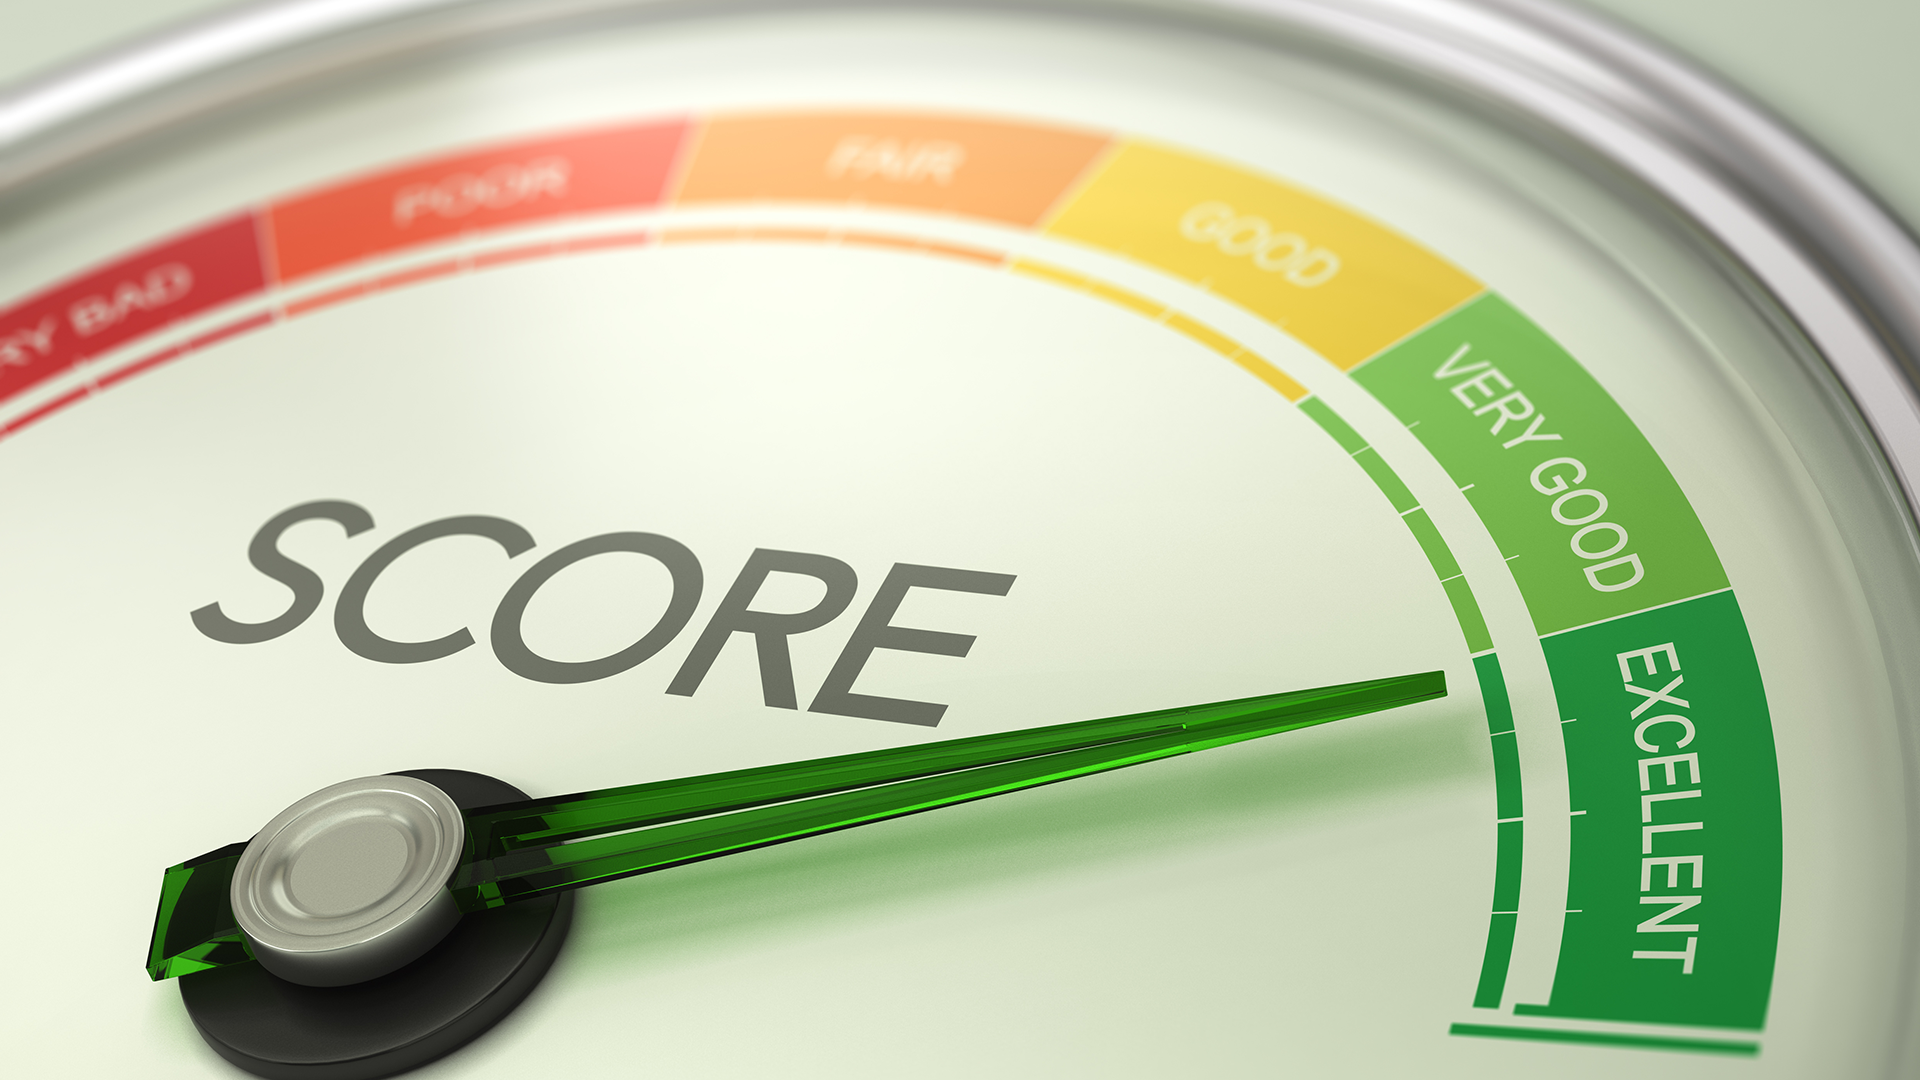 How We Increased Our CREDIT SCORE from 400s to 800+ Without A Credit Specialist